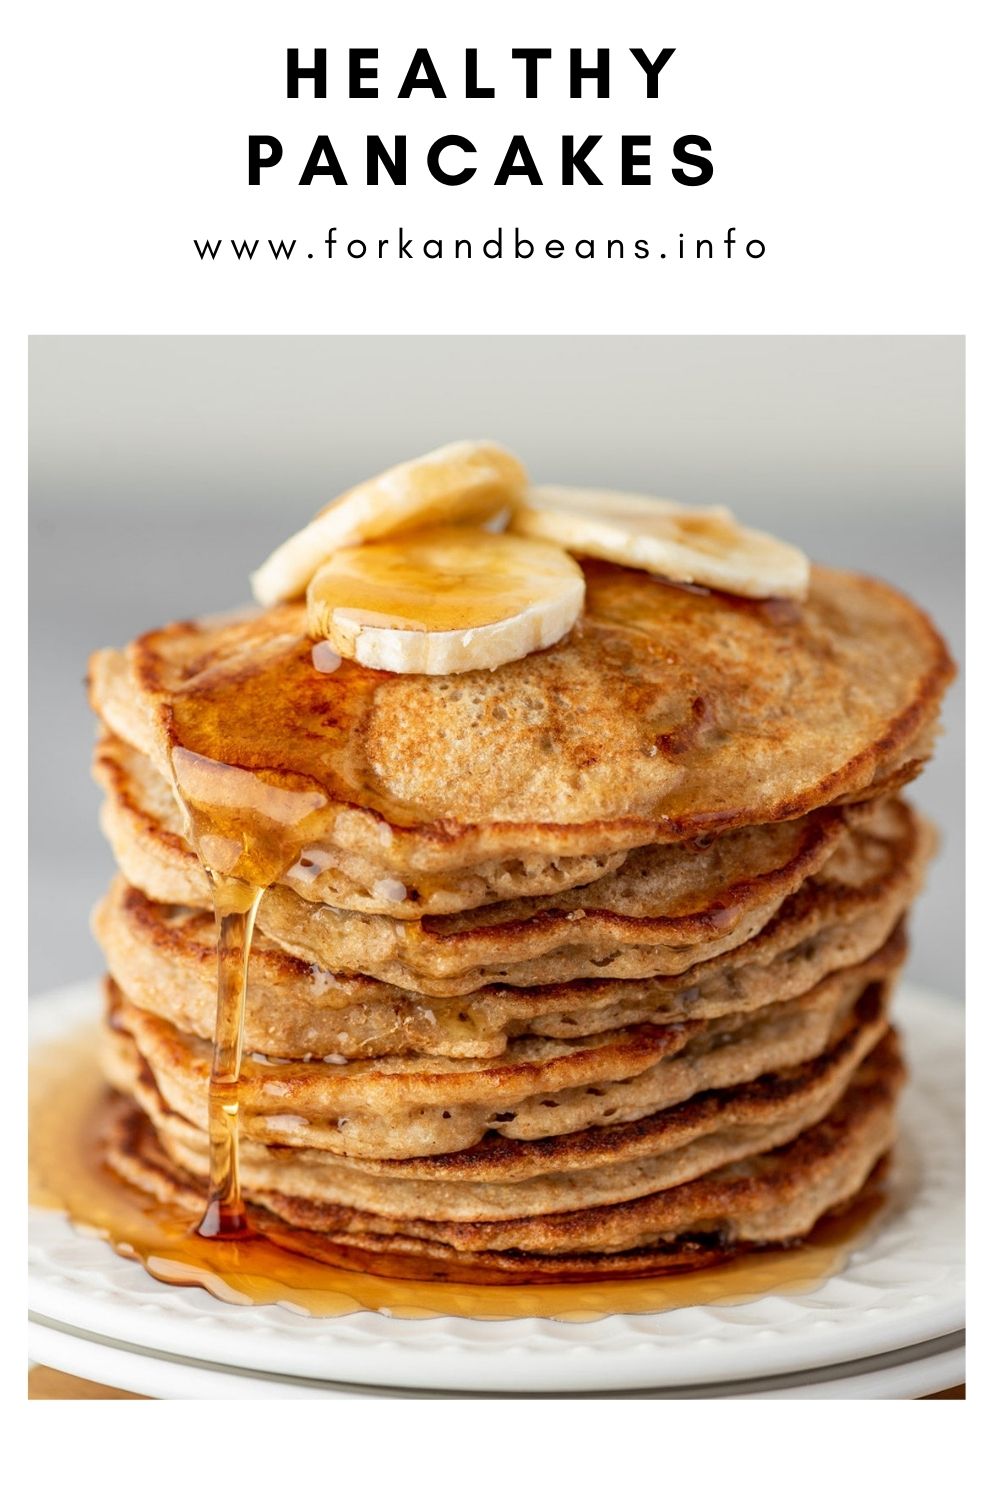 Healthy Banana Oatmeal Pancakes (made right in the blender!)